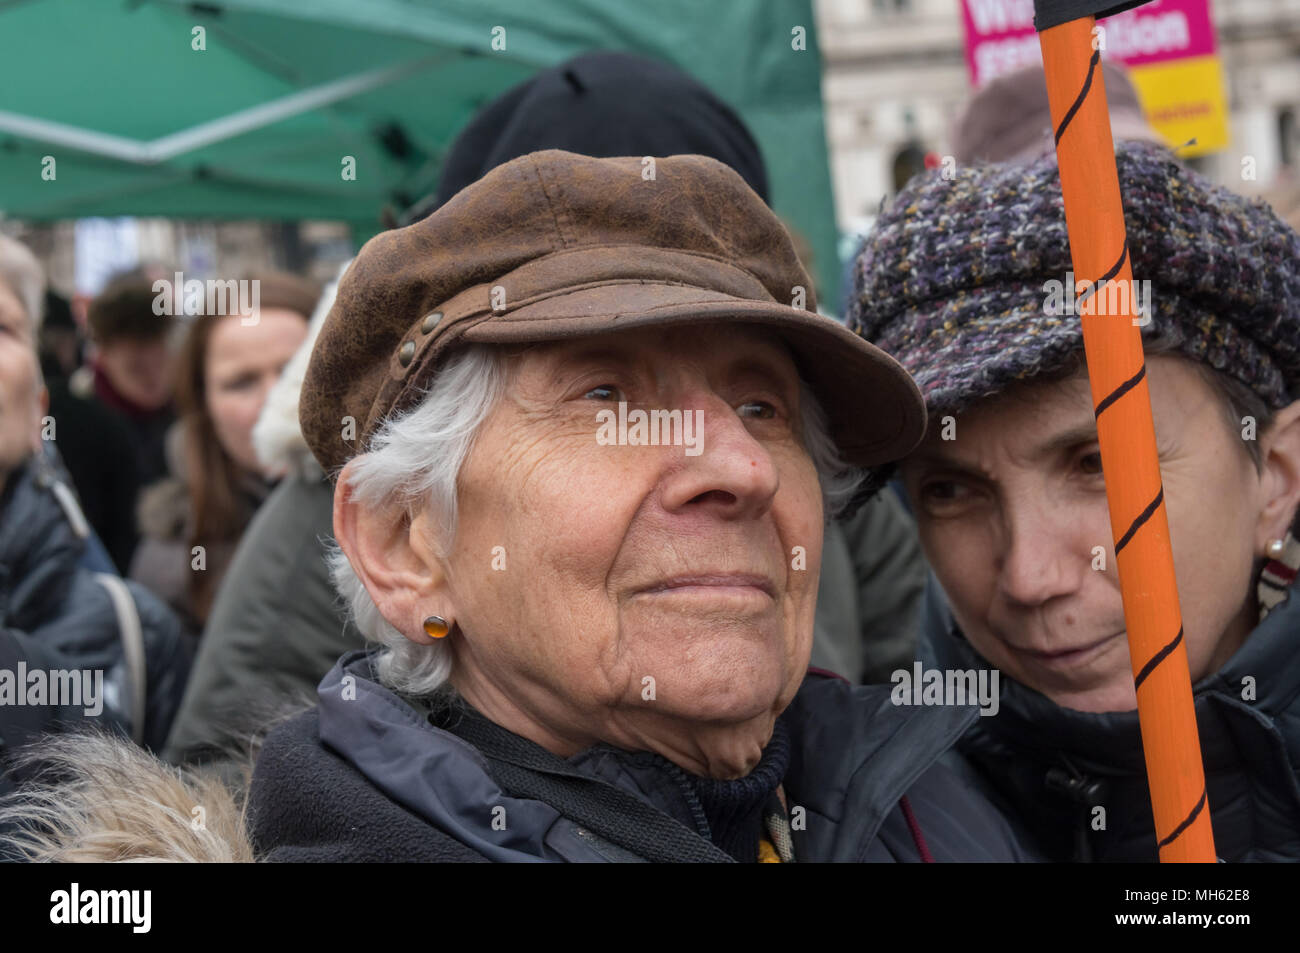 London, UK. 30th April 2018.  Selma James, author of The Power of Women and the Subversion of the Community, co-founder of the International Wages for Housework Campaign, and coordinator of the Global Women's Strike listens at the protest in support of the petition calling for an end to the deportations of migrants in the 'Windrush generation' who arrived in Britain between 1948 and 1971. It calls on the government to change the burden of proof which means they are now required to prove their right to remain, and to provide compensation for any loss and hurt.. Most of those who have been depor Stock Photo